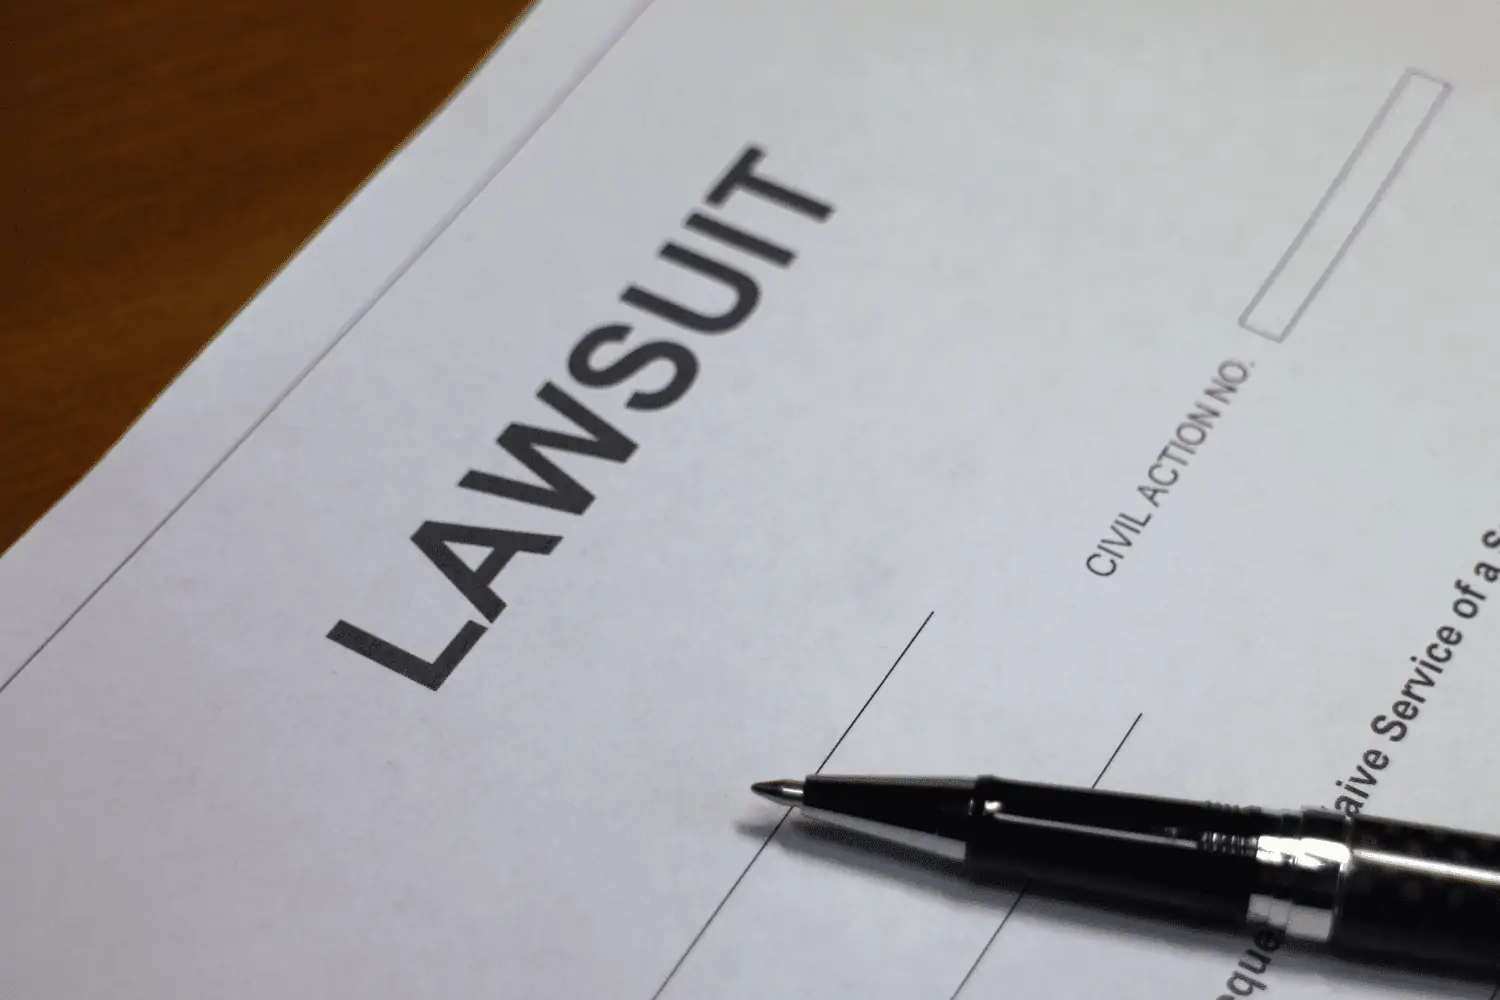 avoiding wrongful termination lawsuits